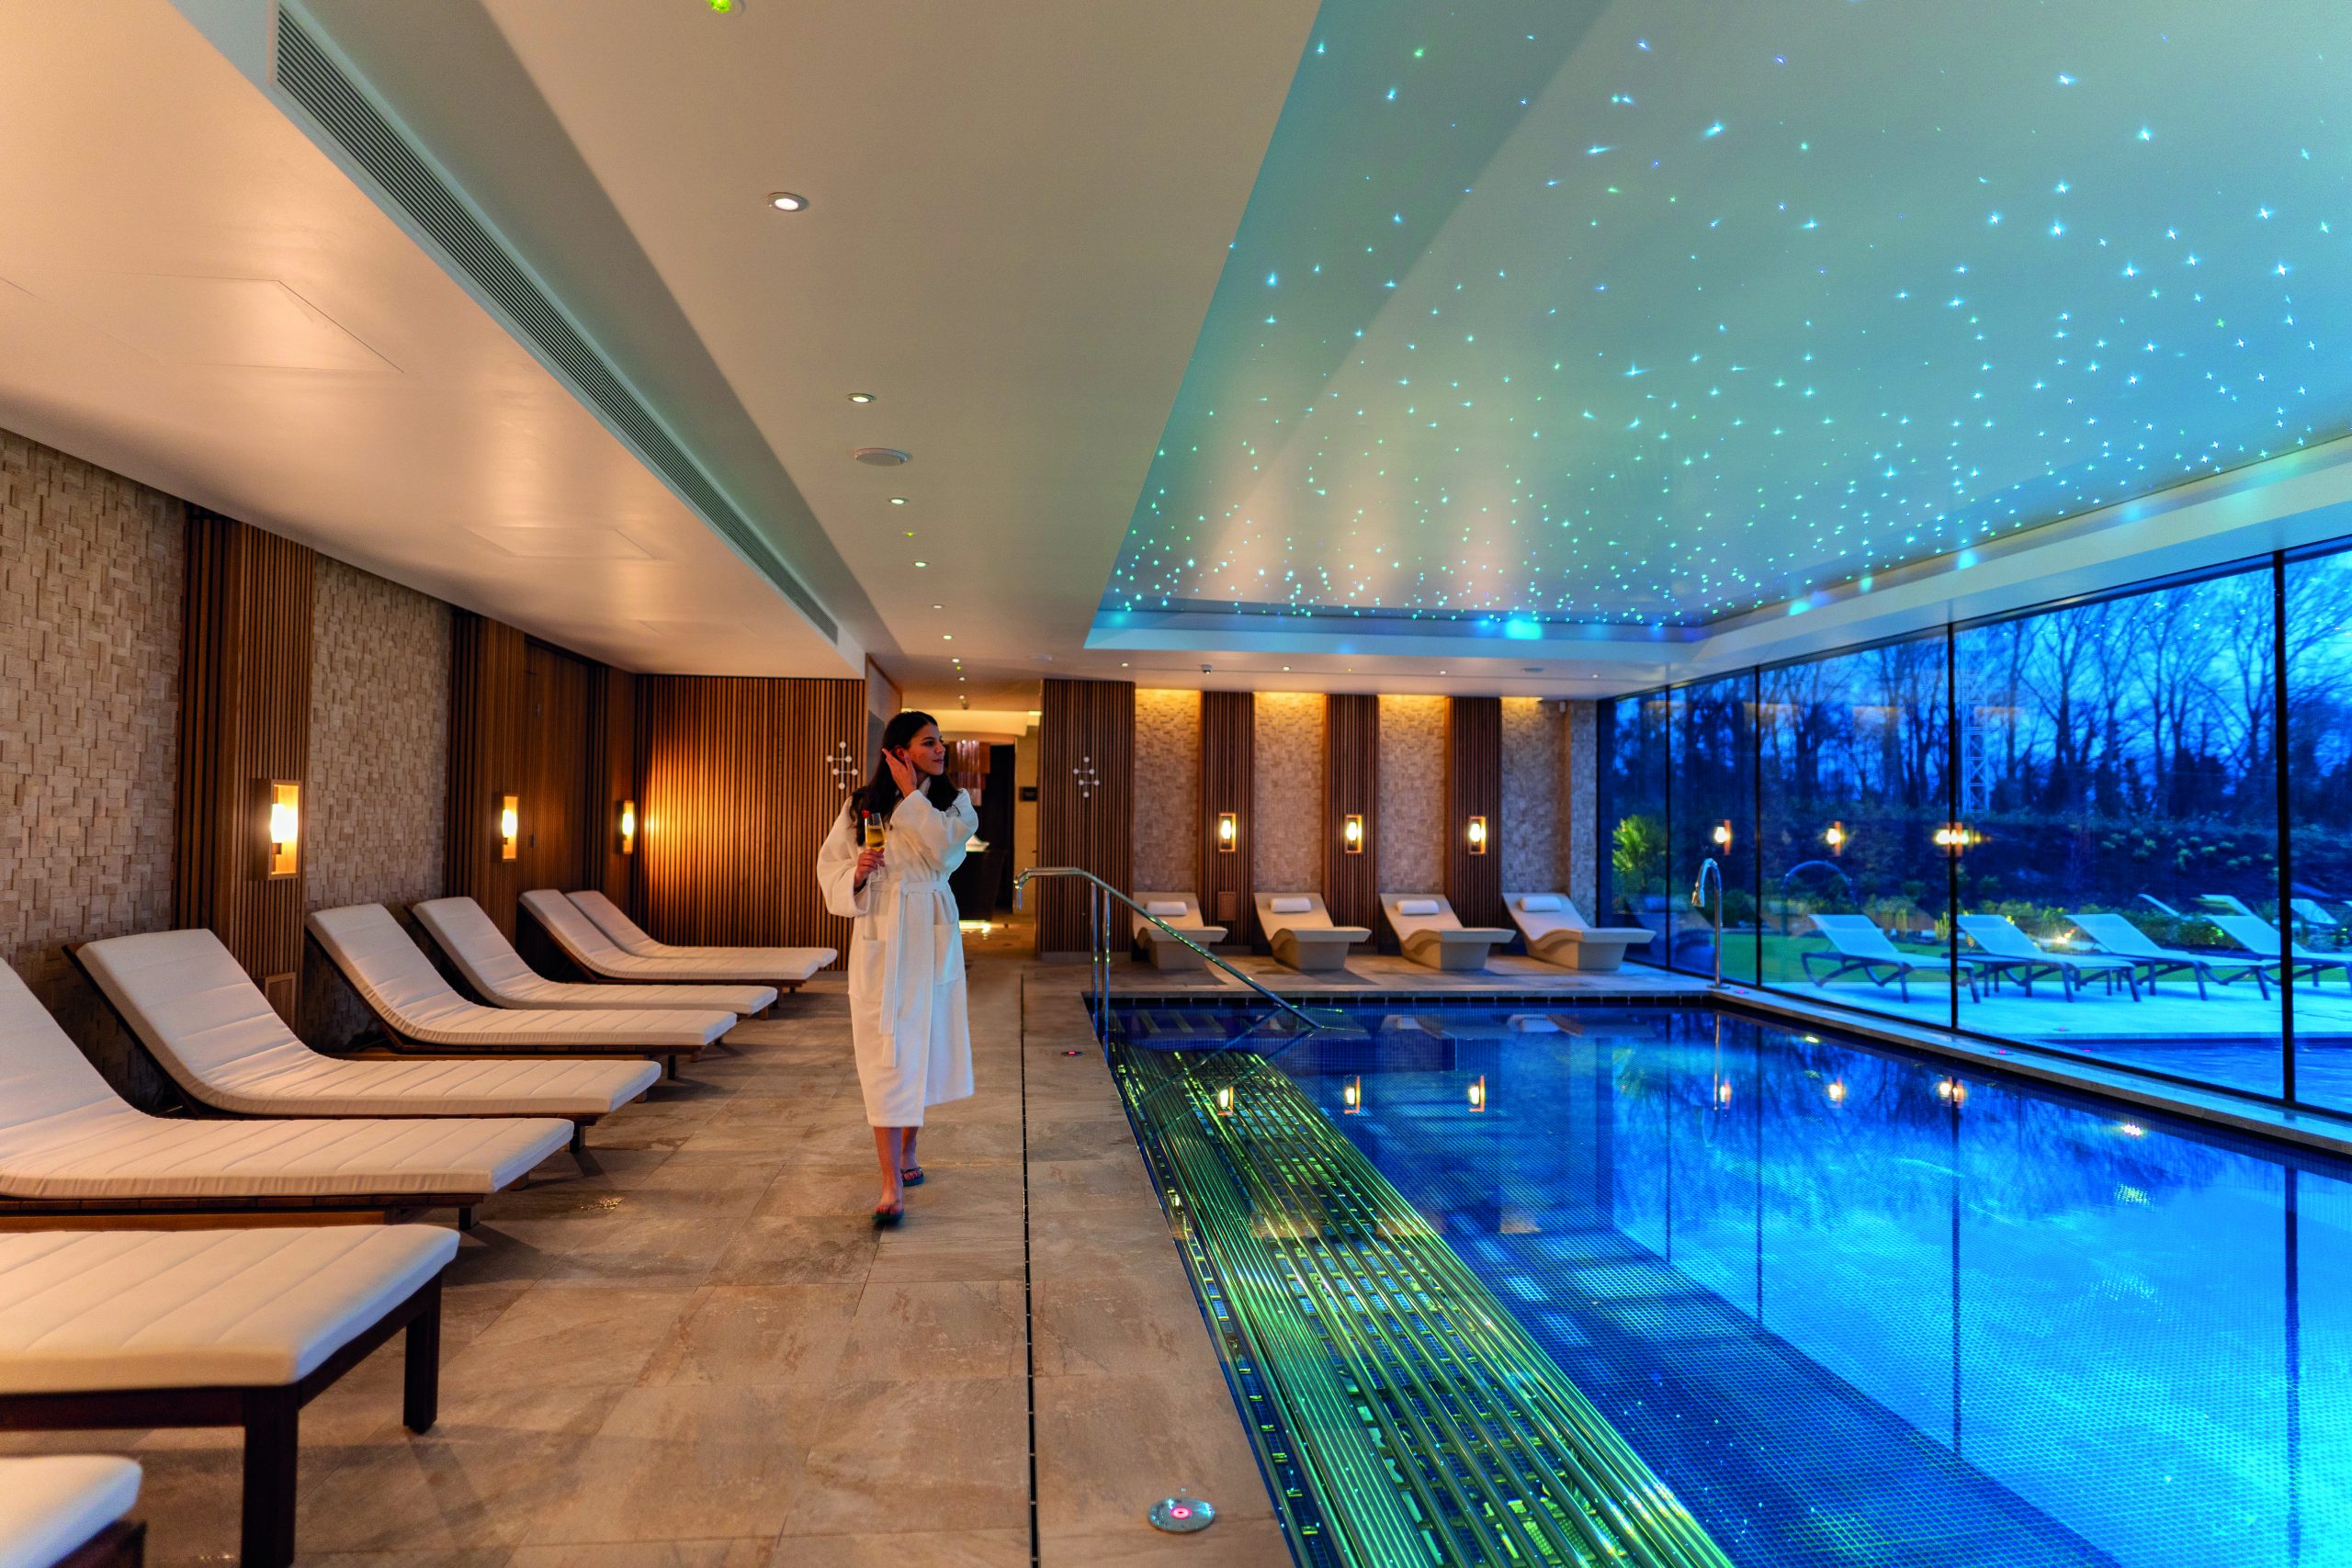 you'll find a luxurious new destination spa, The Spa at Carden, wh...